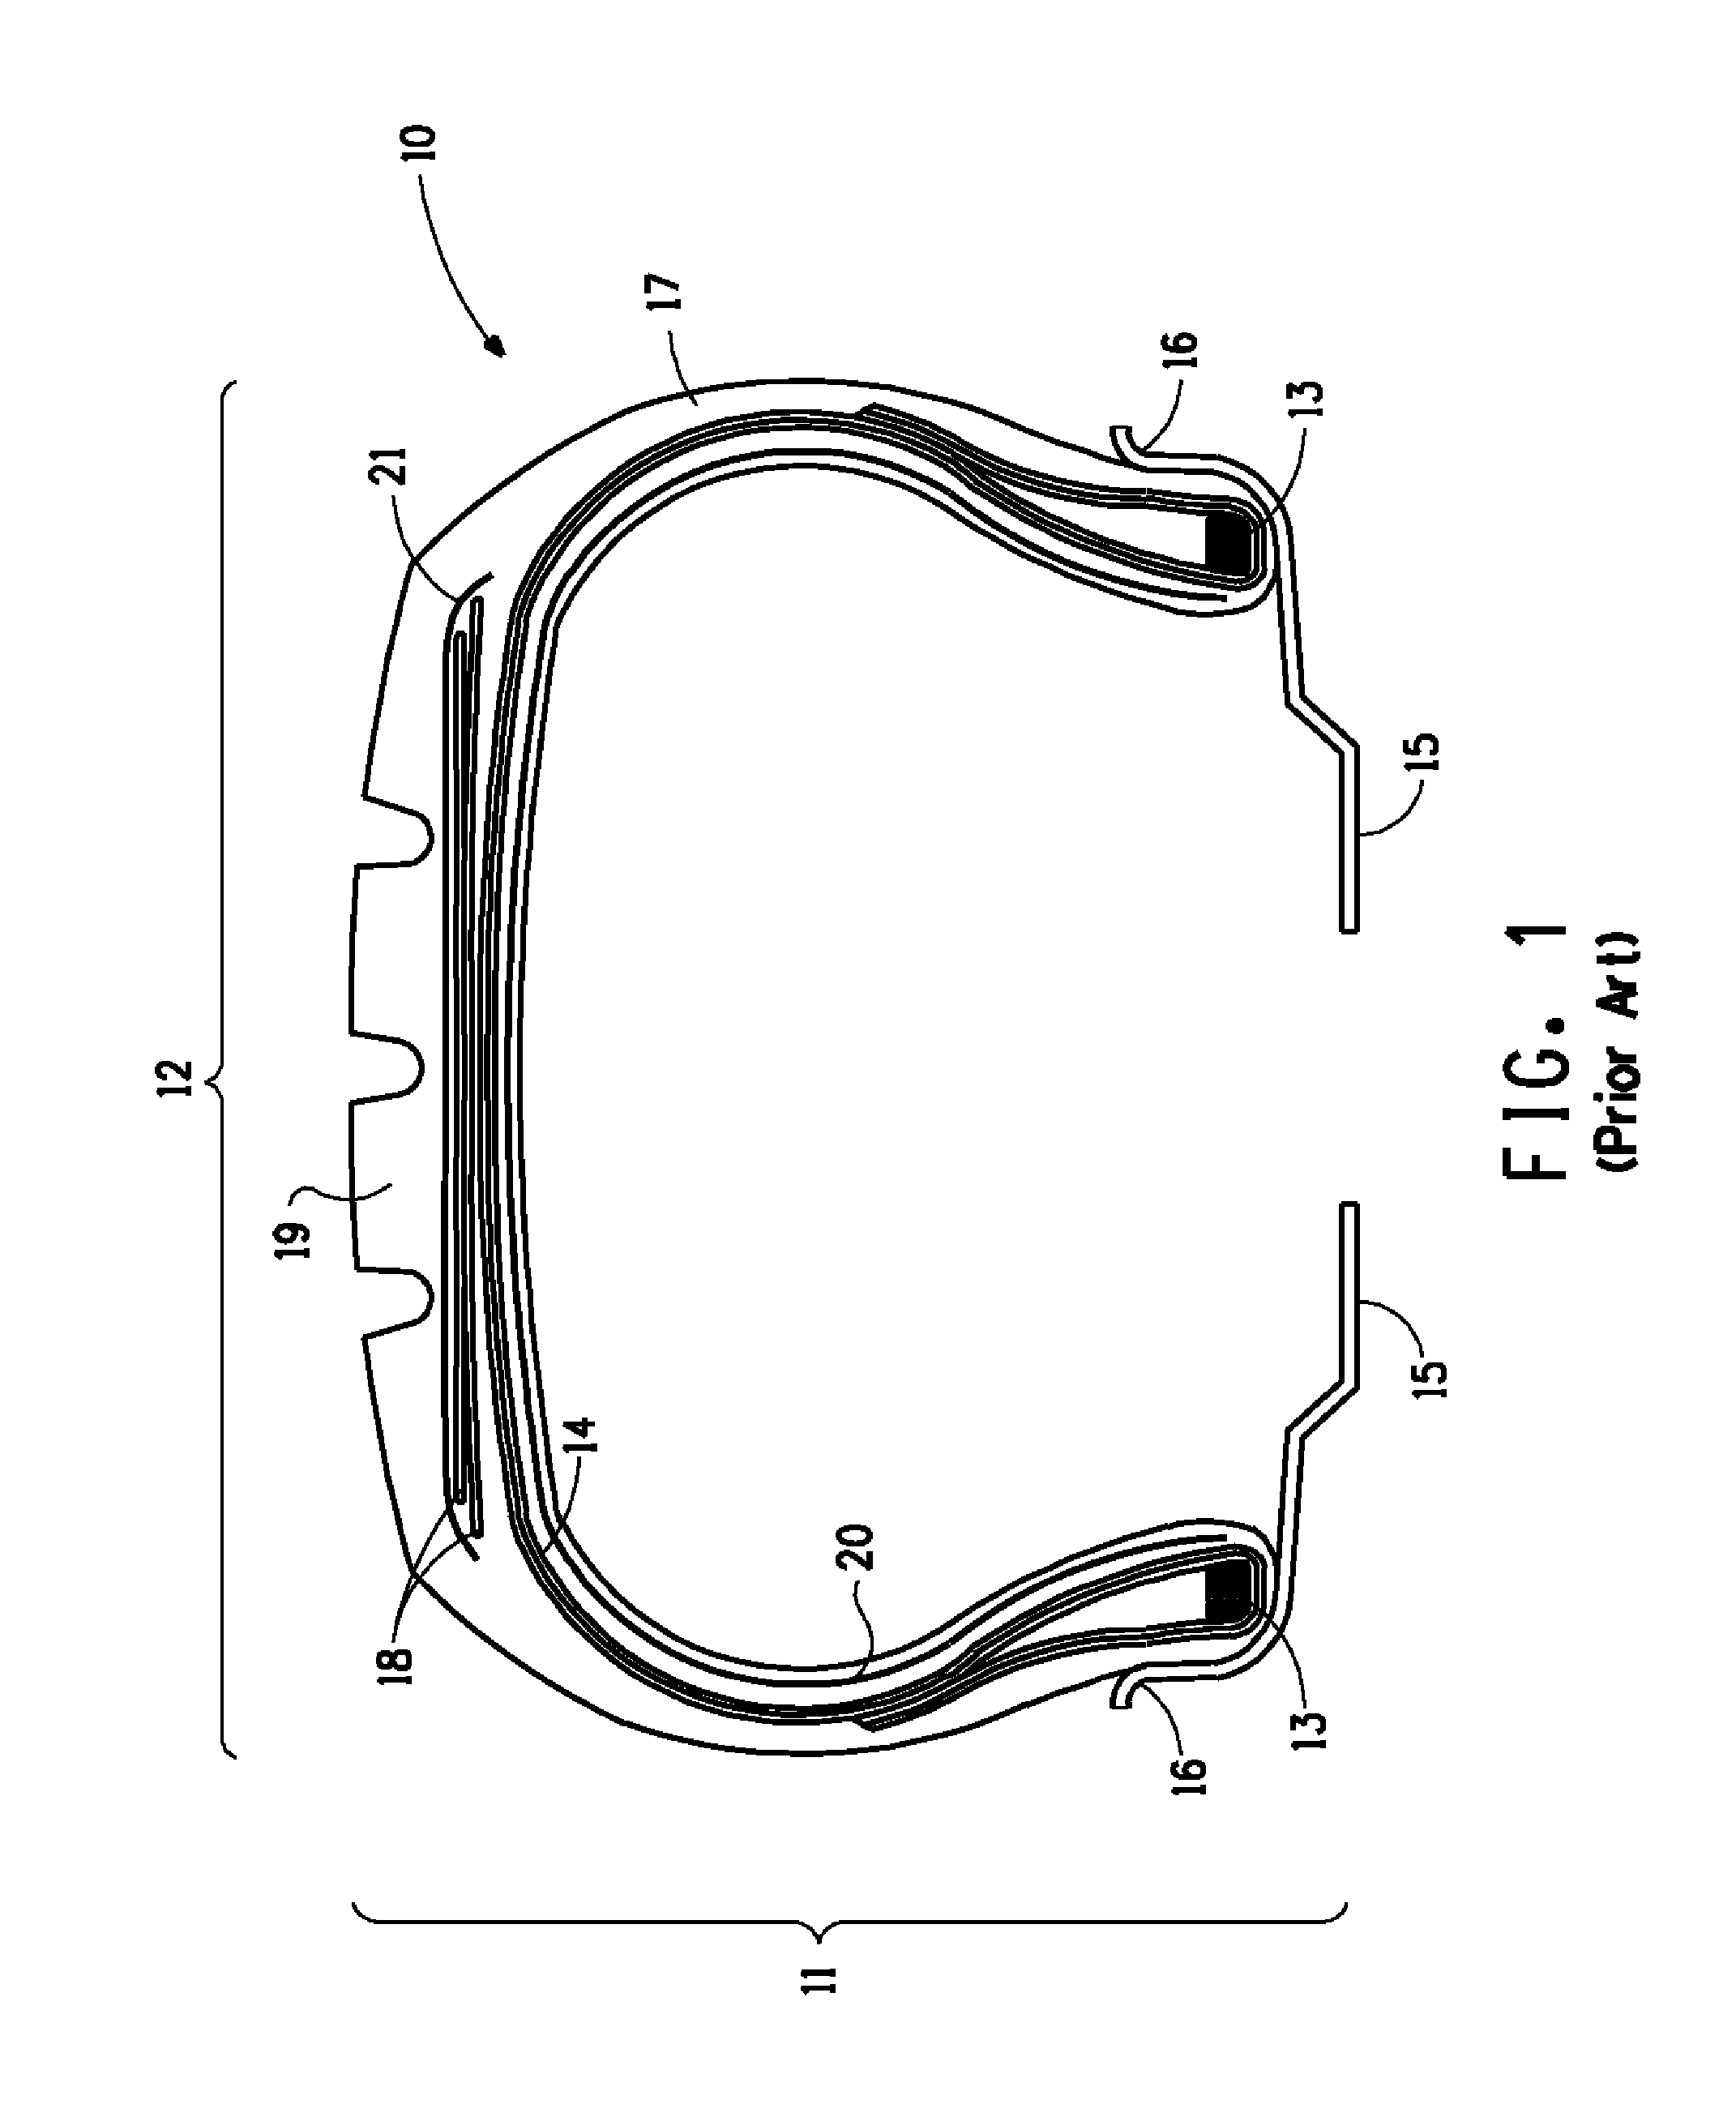 Tire containing a component for reducing vibration-generated noise in a tire and method for reducing tire noise